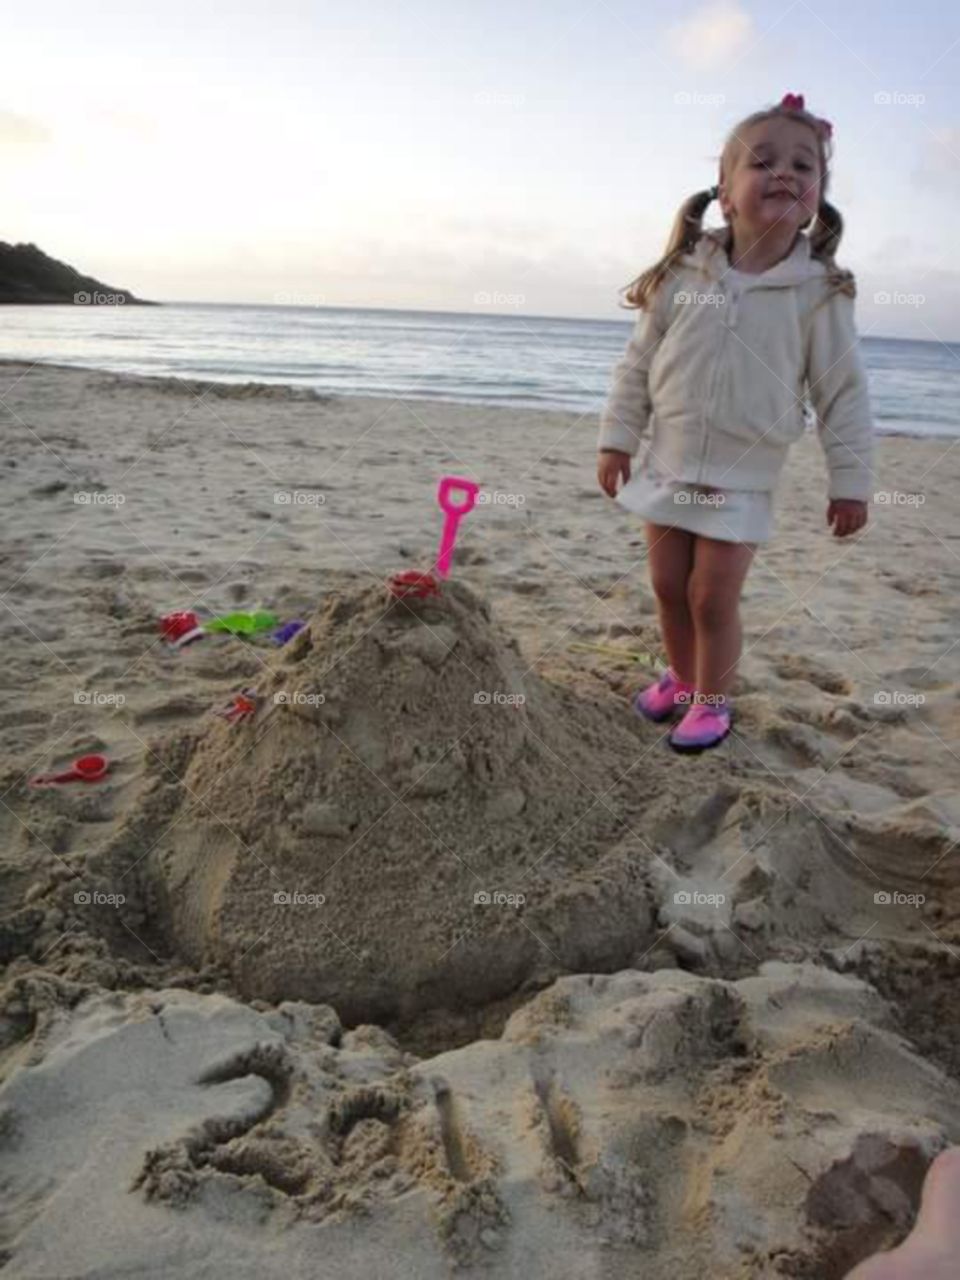 building castles on the beach. Cornwall